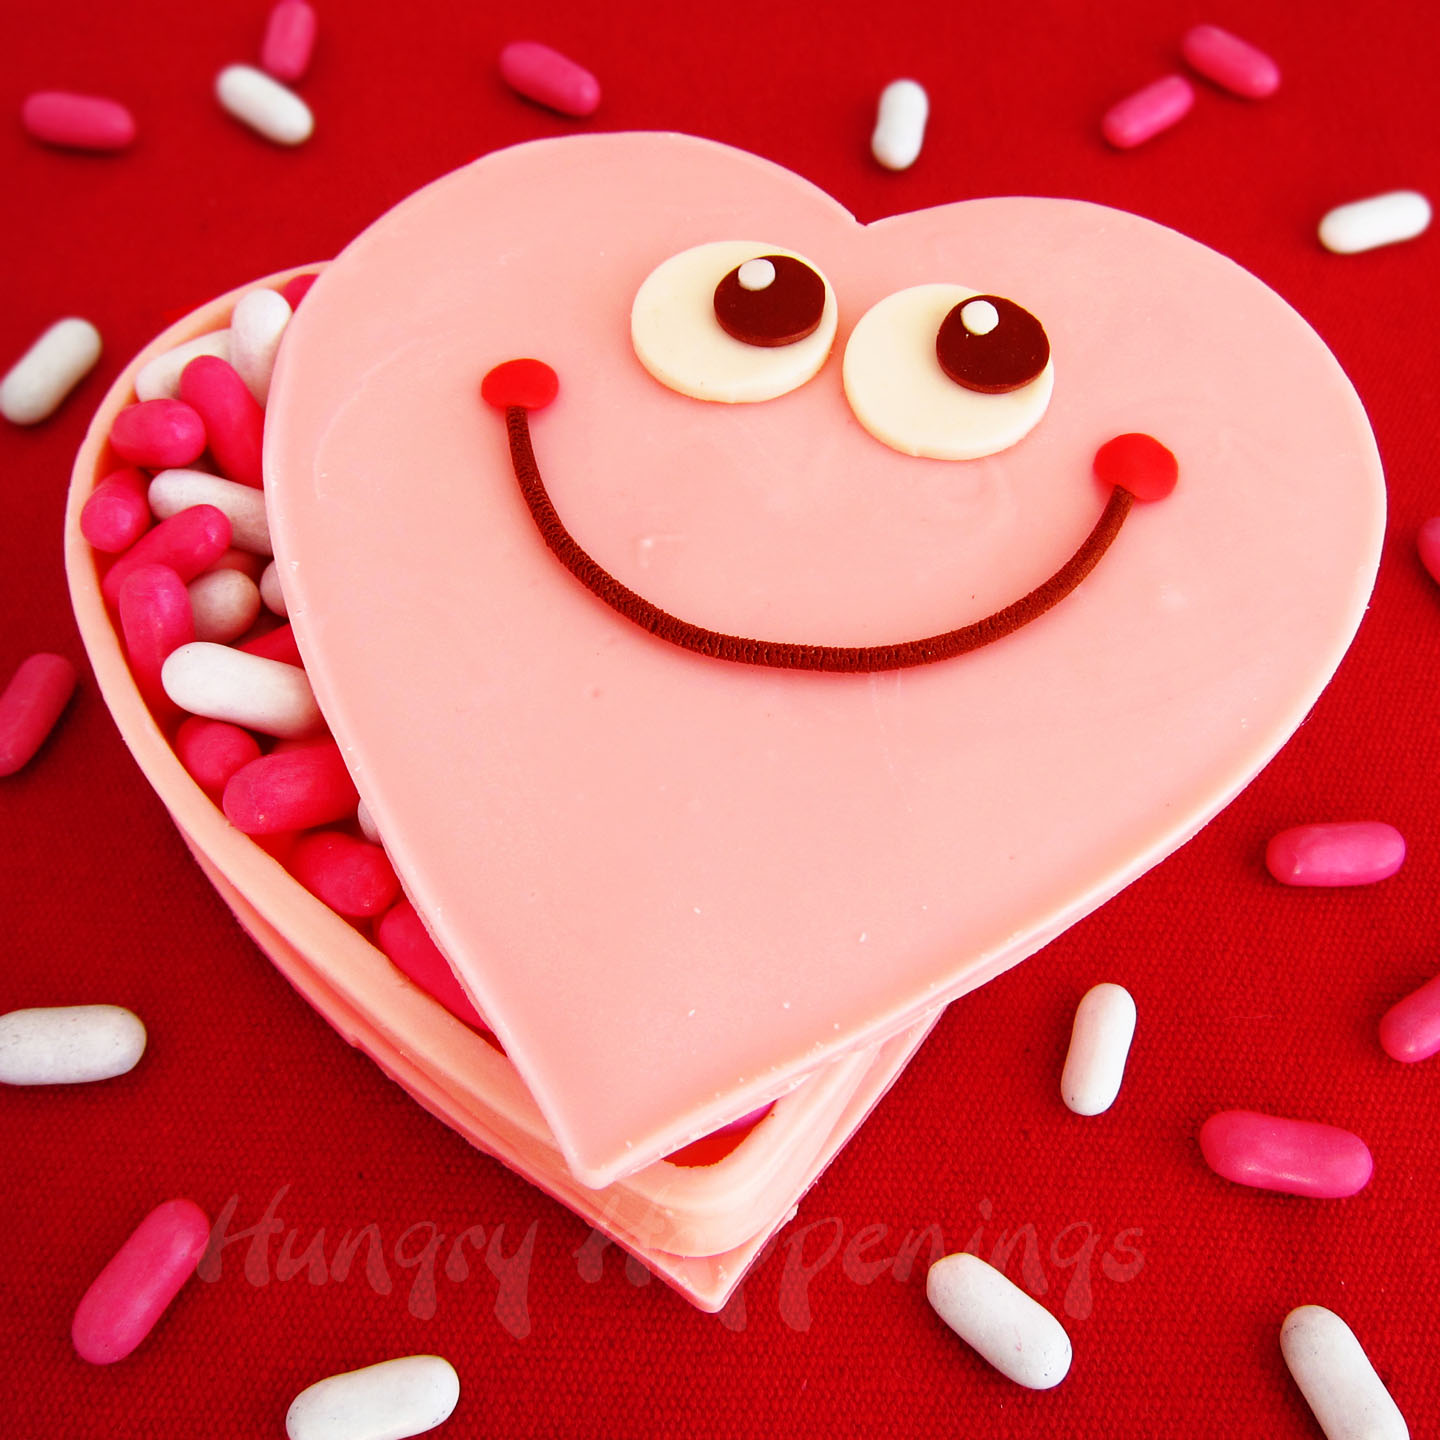 White+chocolate+heart+box,+Valentine's+Day+candy,+gifts,+edible+crafts ...